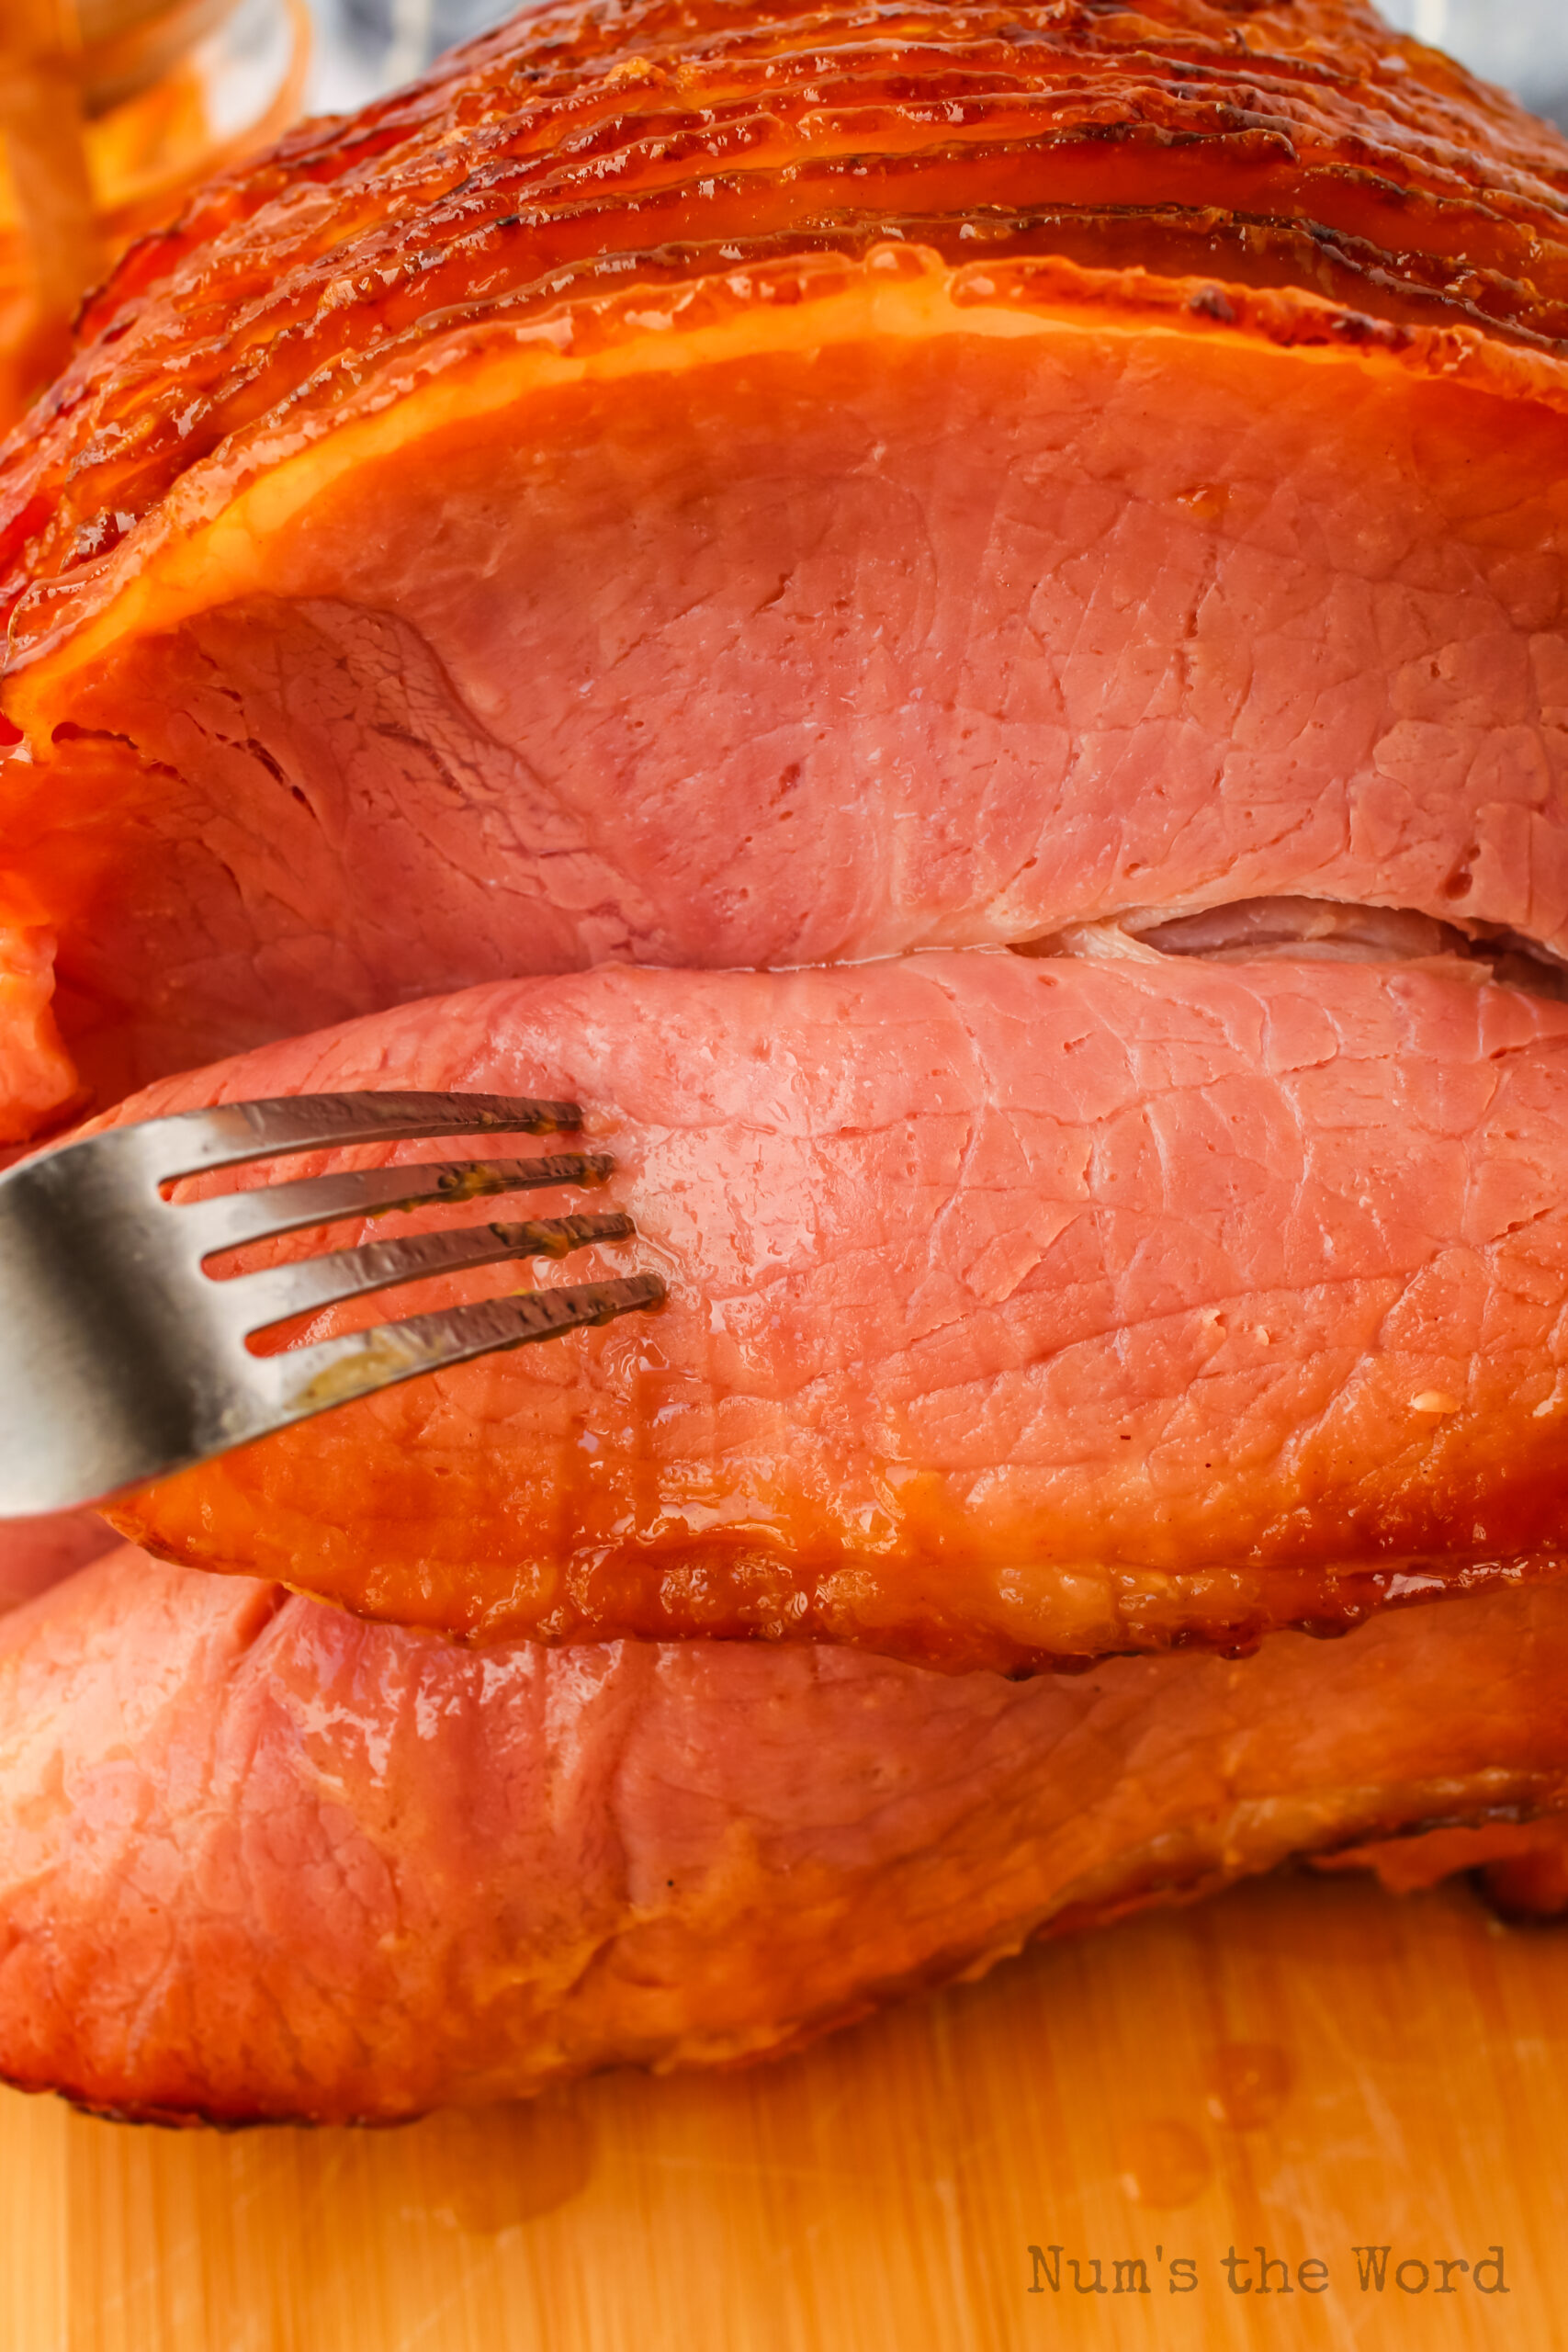 zoomed in image of ham slices still on the bone